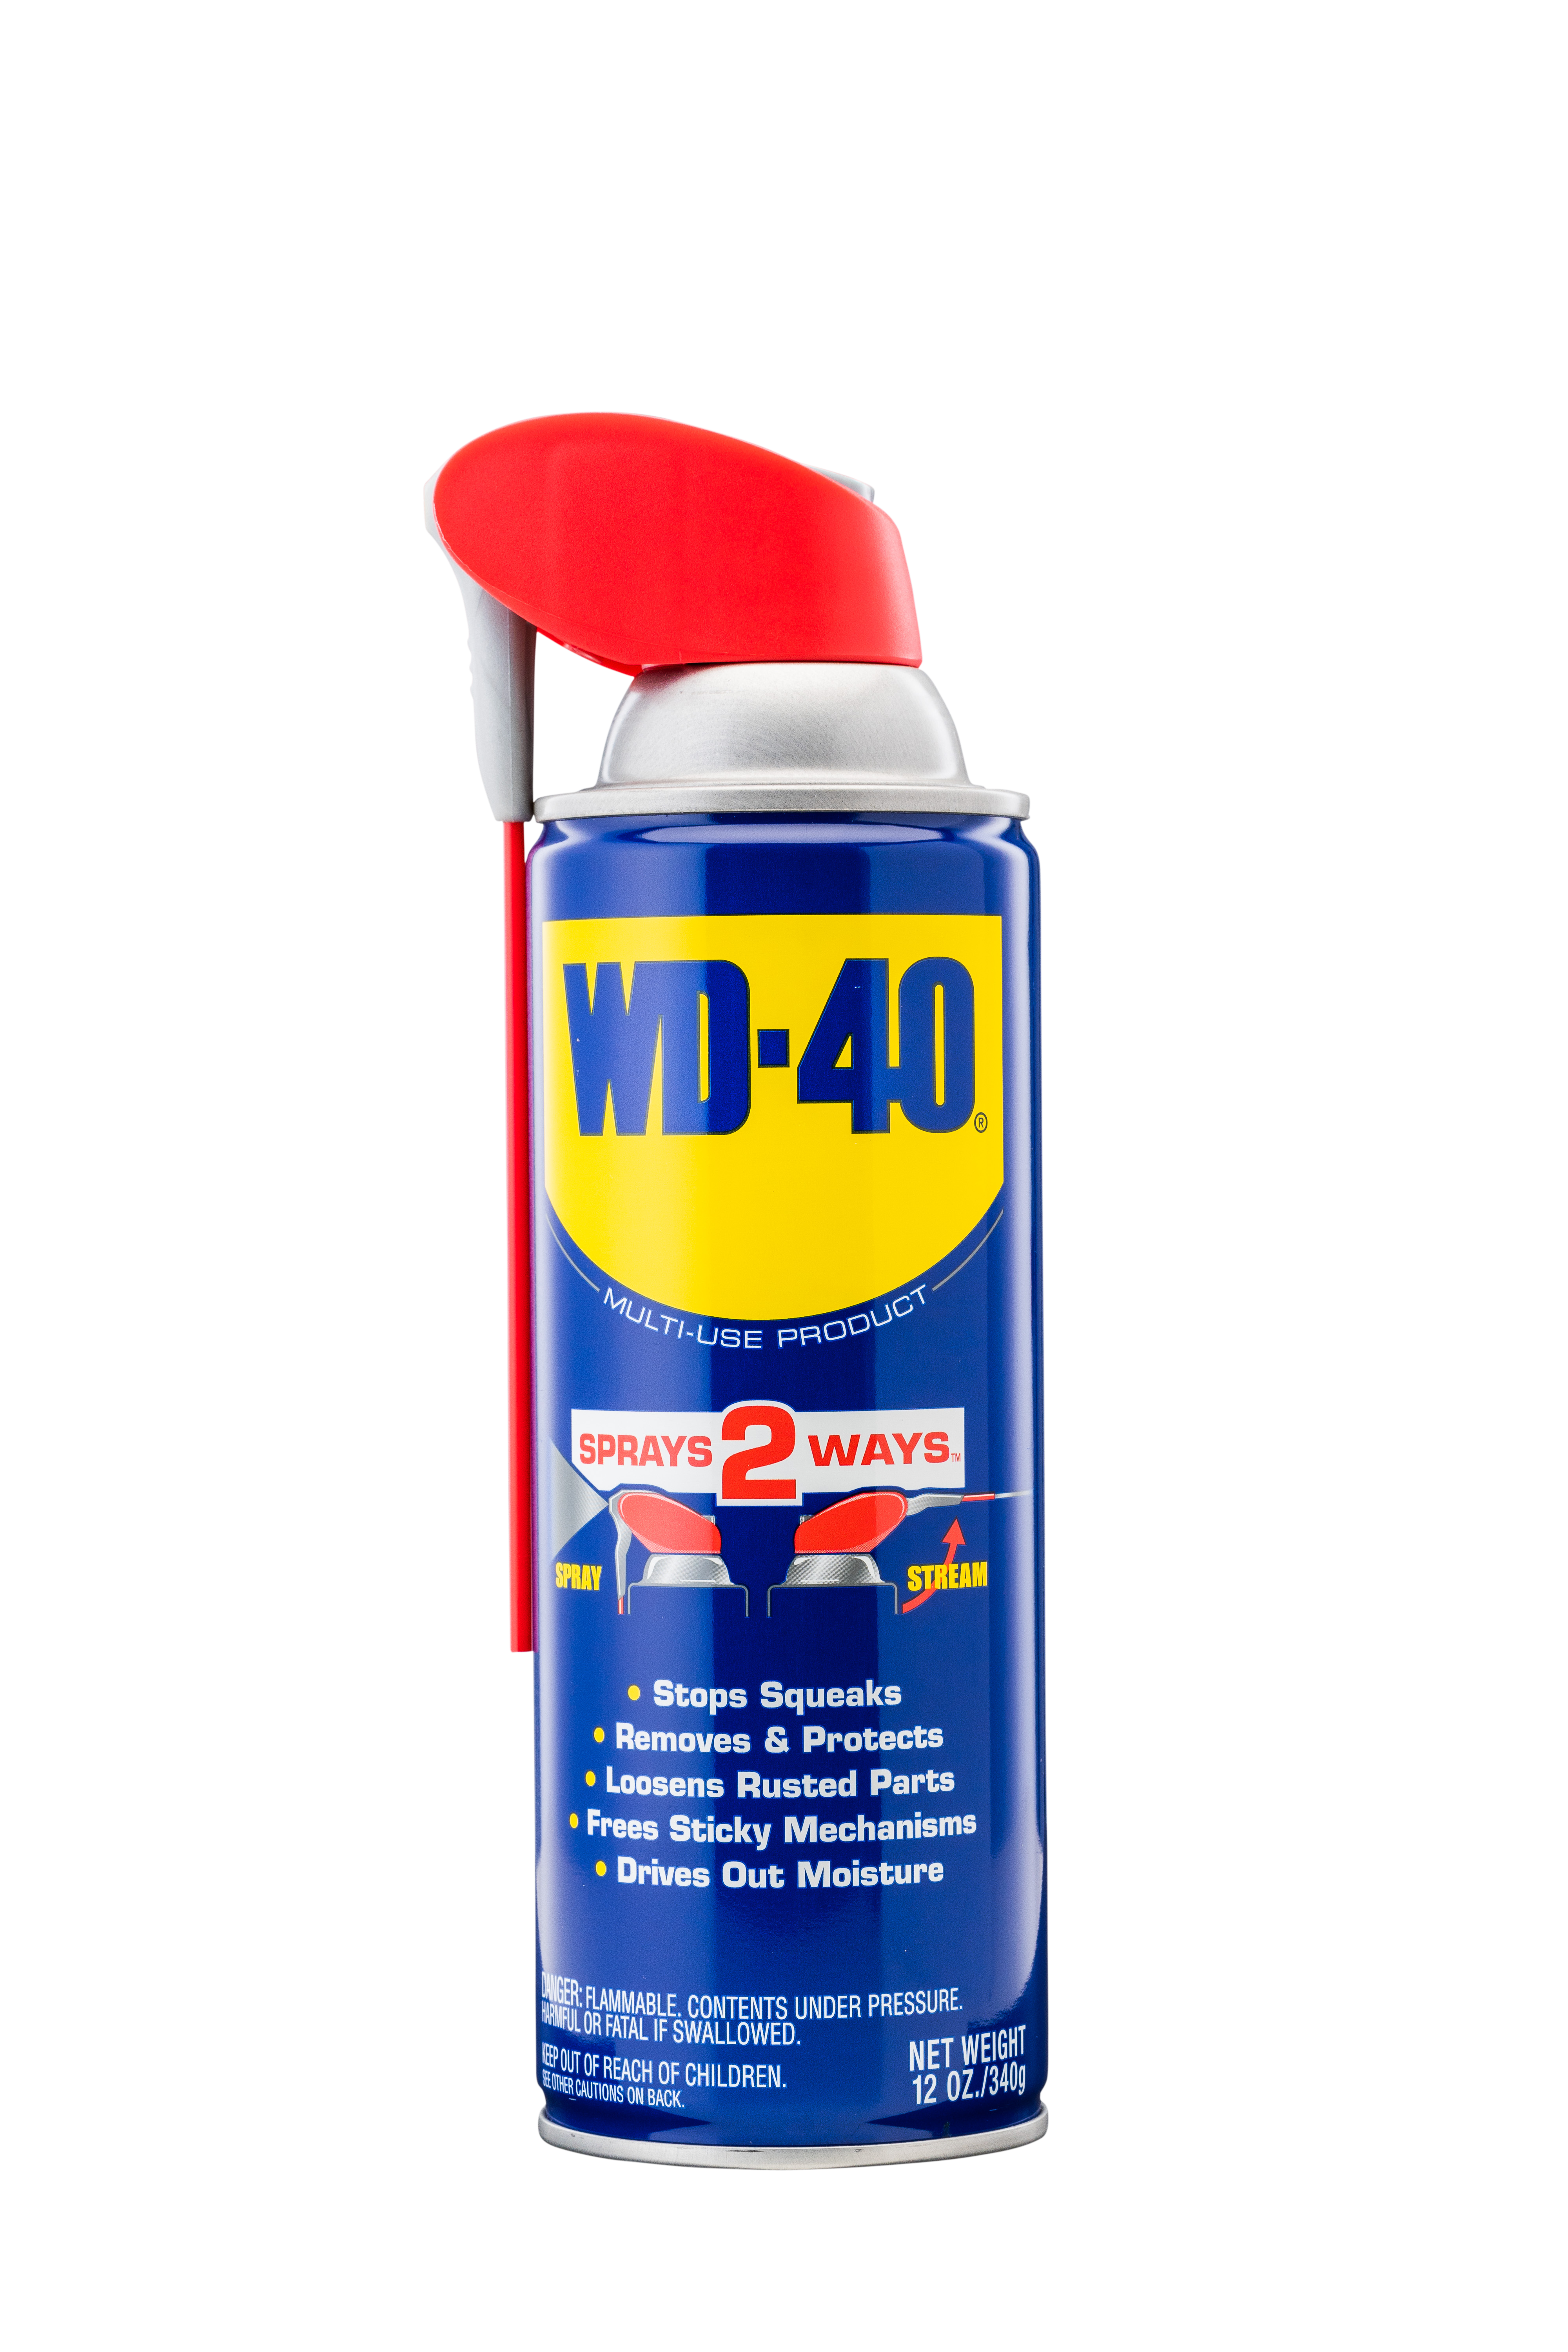 WD-40 to Support Habitat for Humanity | THE SHOP